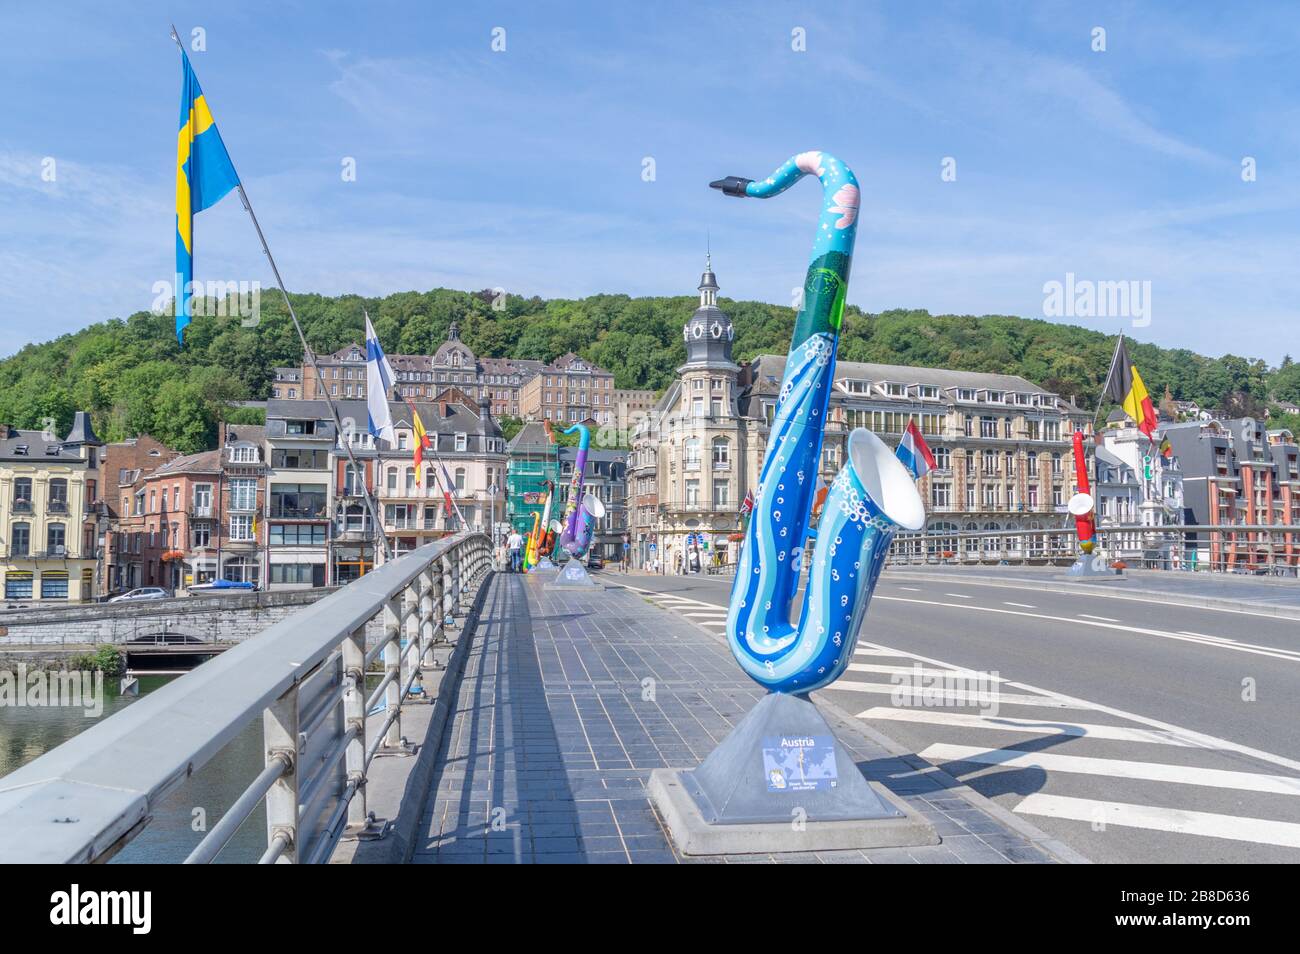 Bridge across Meuse river in Dinant, Belgium. The bridge is decorated with sculptures of saxophones, because the inventor Adolphe Sax was from Dinant. Stock Photo